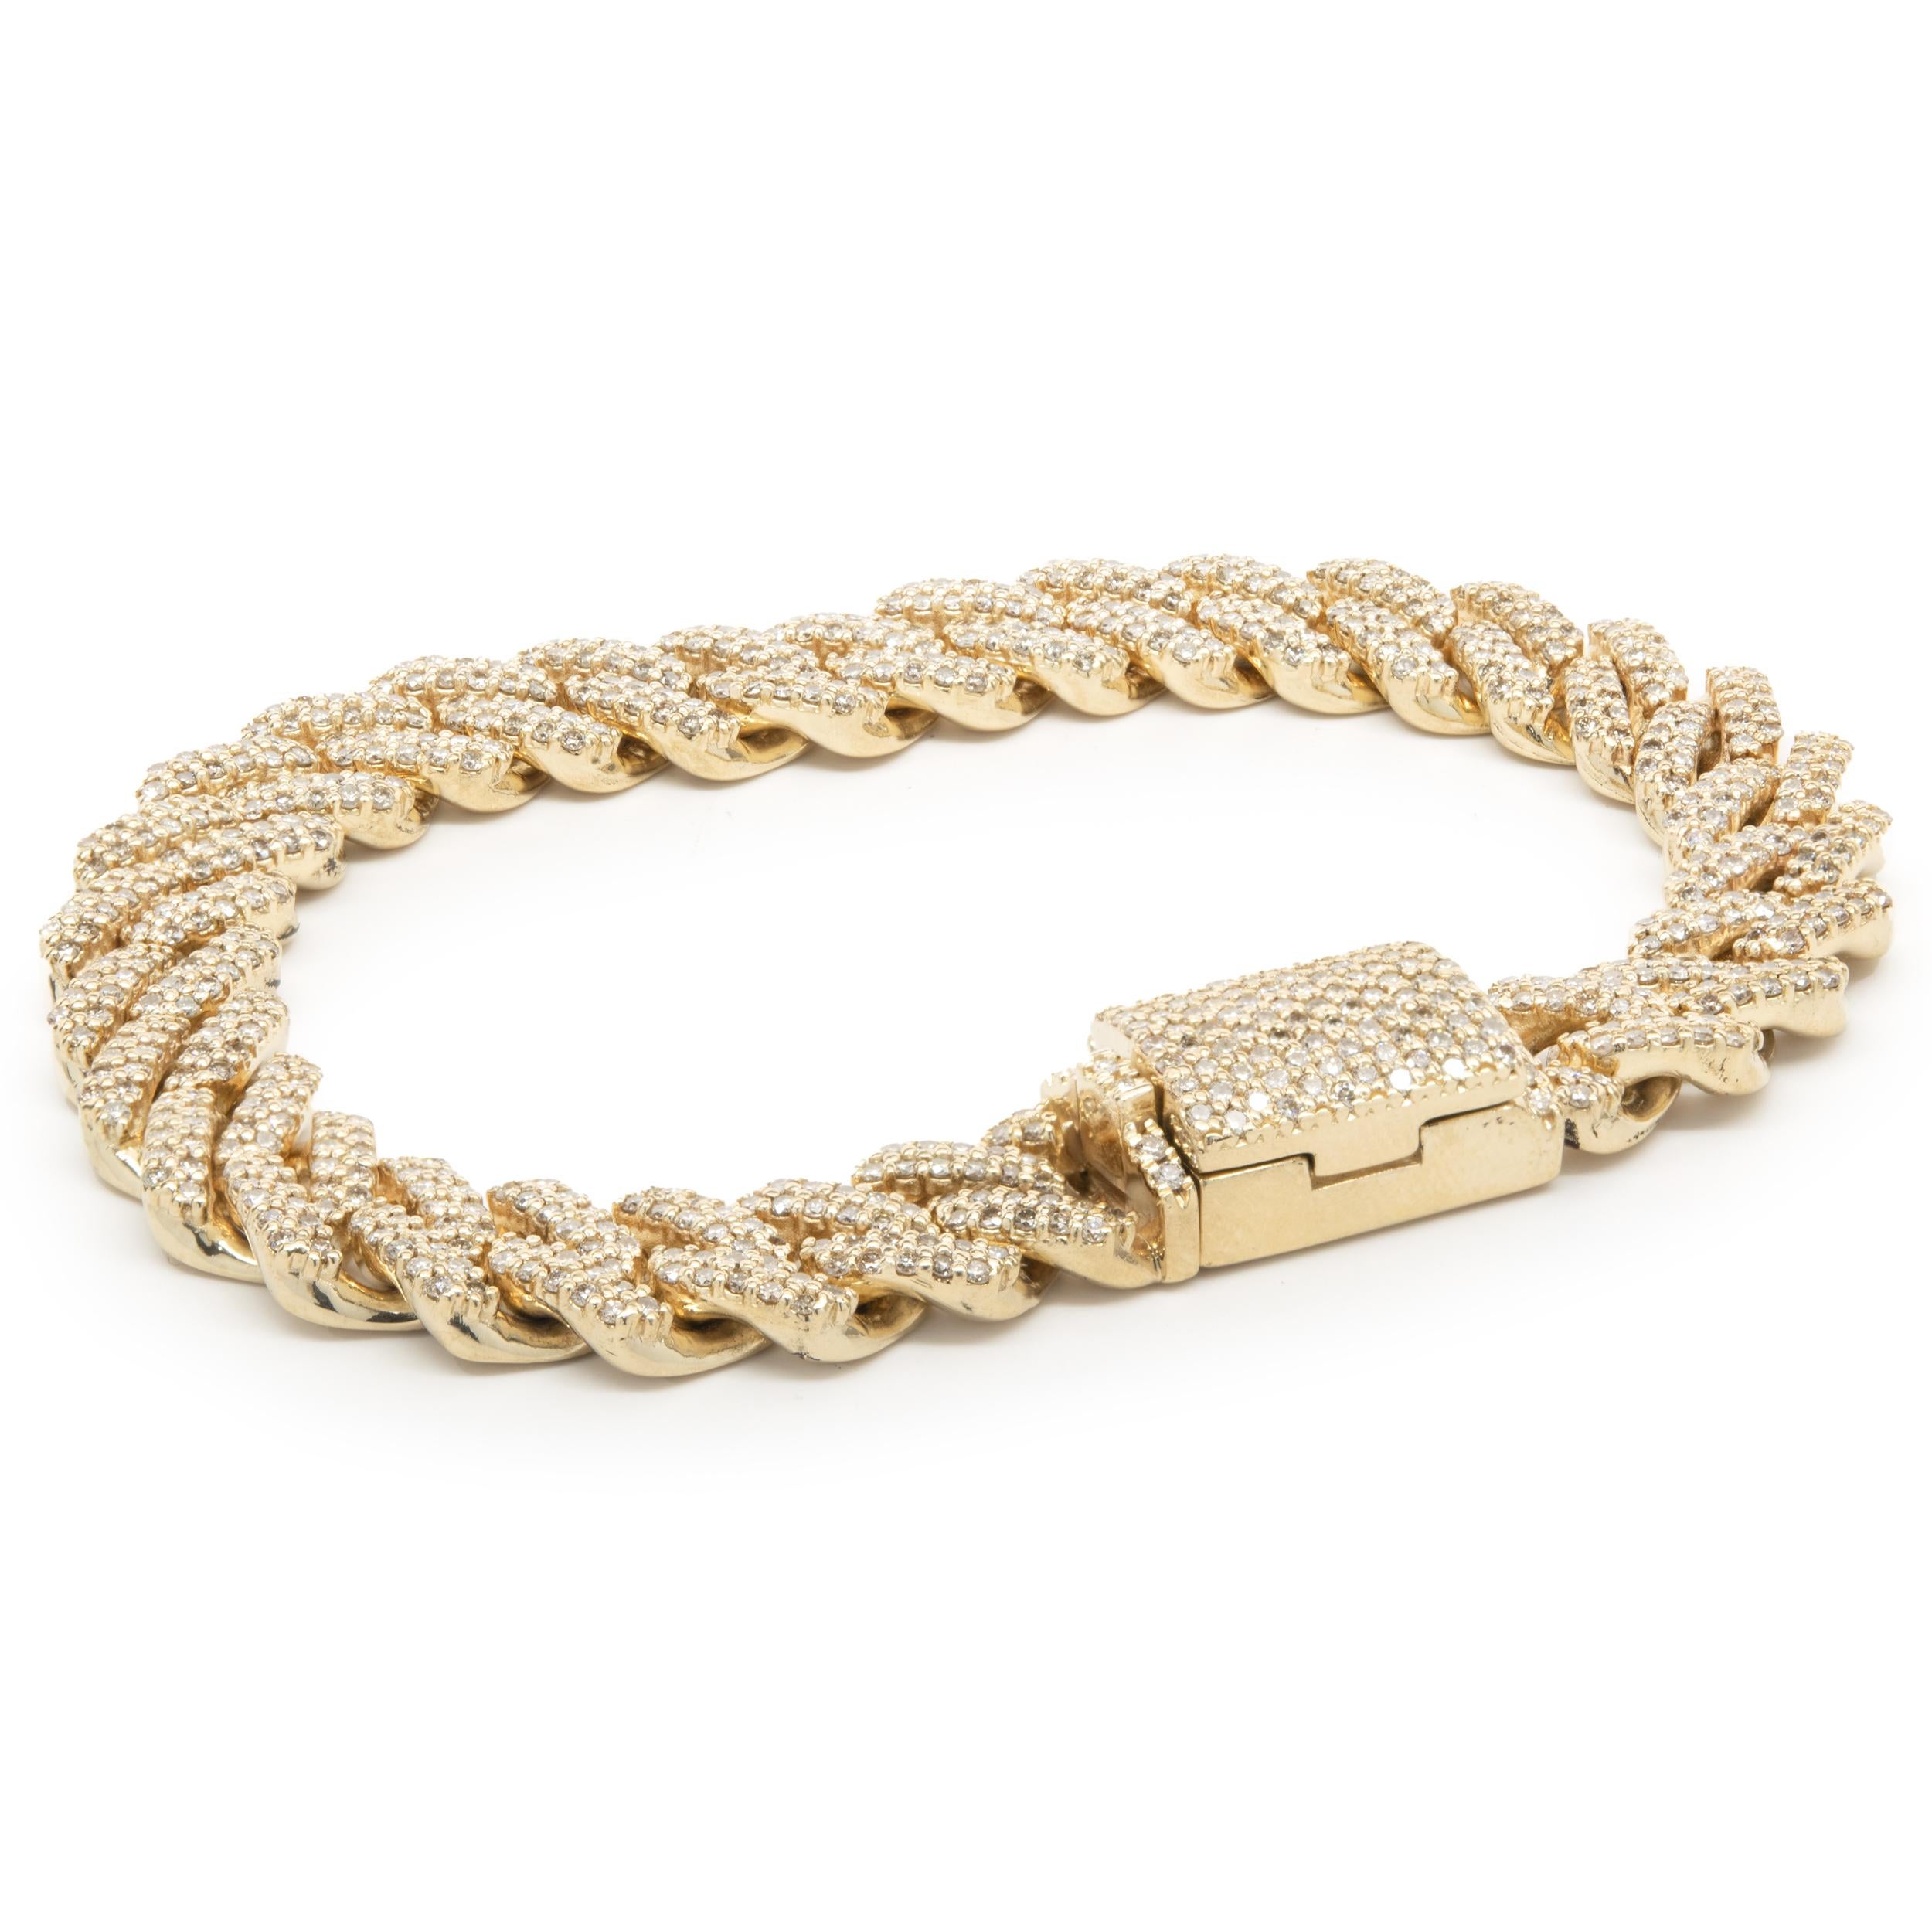 Designer: custom 
Material: 14K yellow gold
Diamond: 739 round brilliant cut = 7.40cttw
Color:  H / I
Clarity: SI2
Dimensions: bracelet will fit up to a 7.75-inch wrist
Weight: 54.28 grams